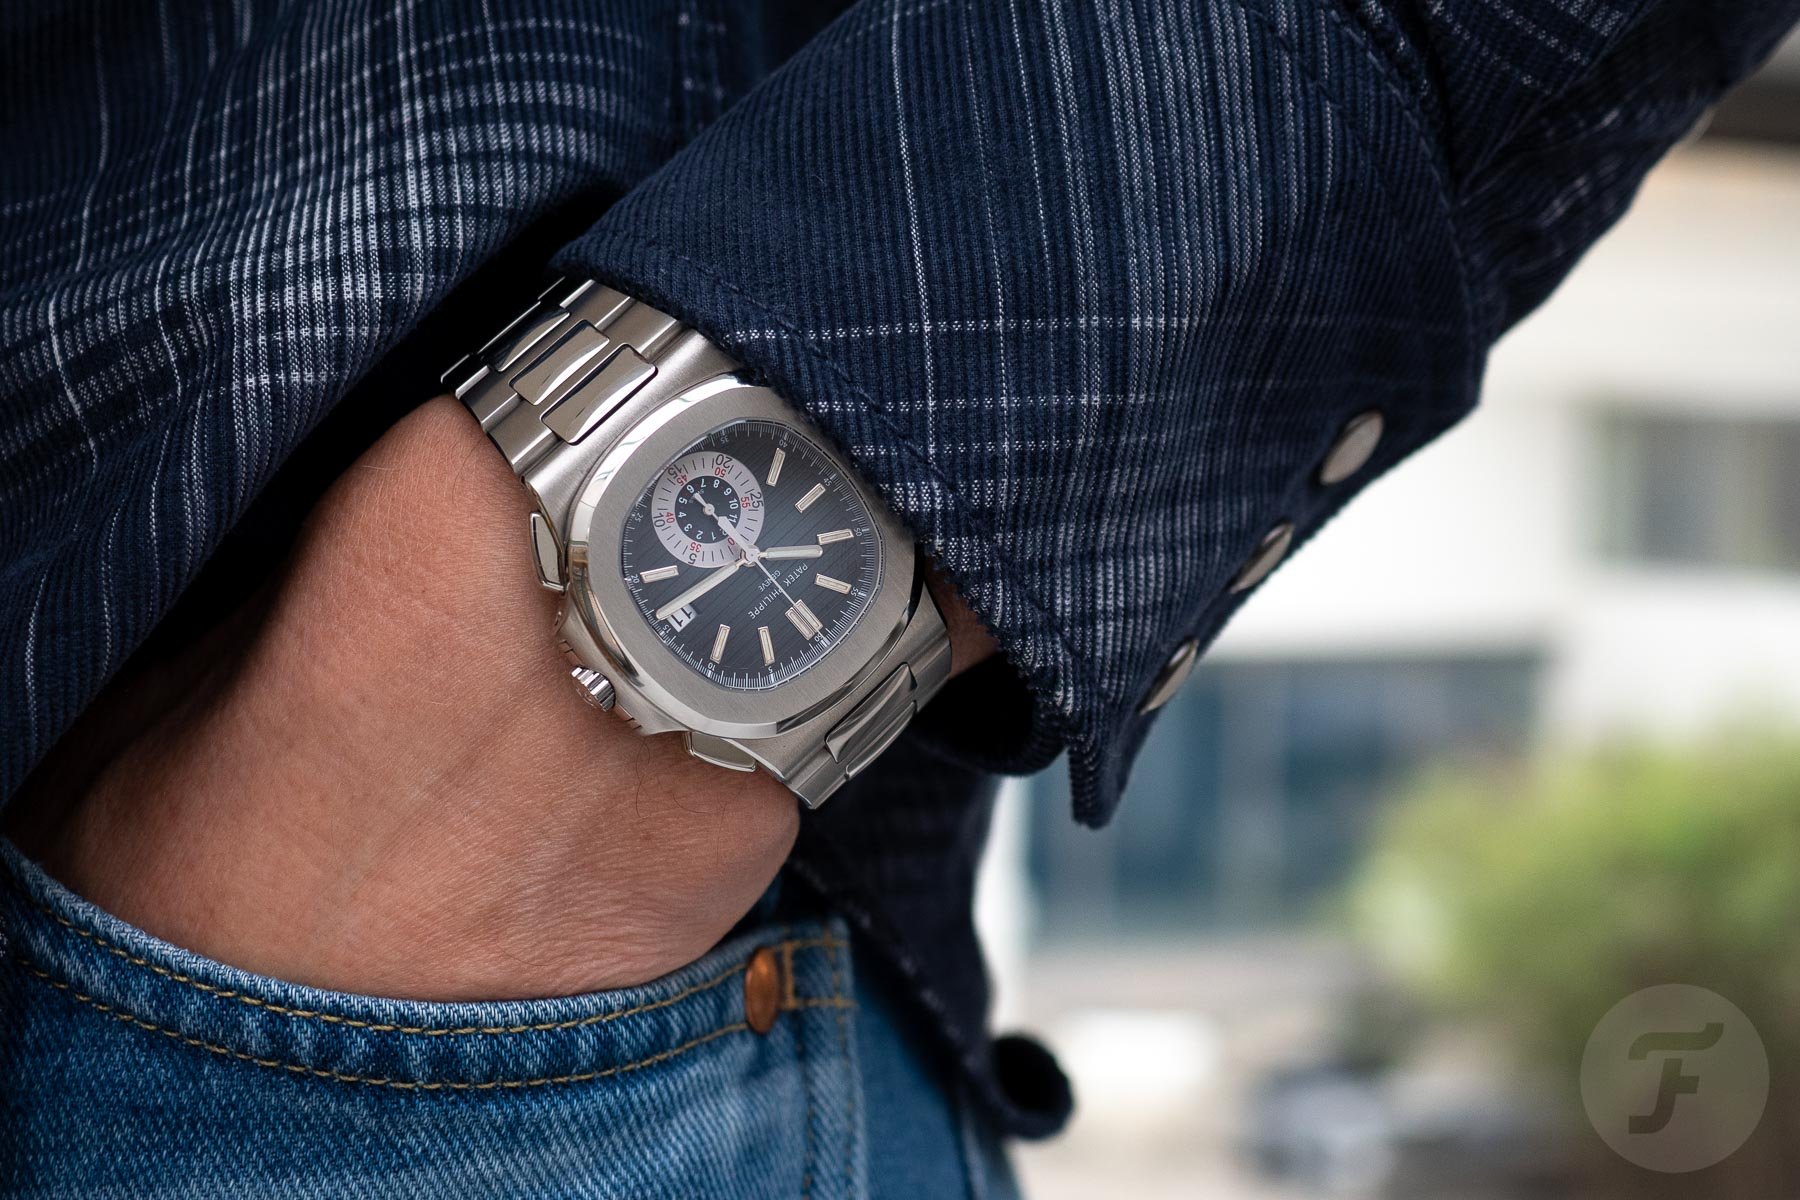 Patek Philippe Nautilus 5740/1G-001 sold at auction on 31st March